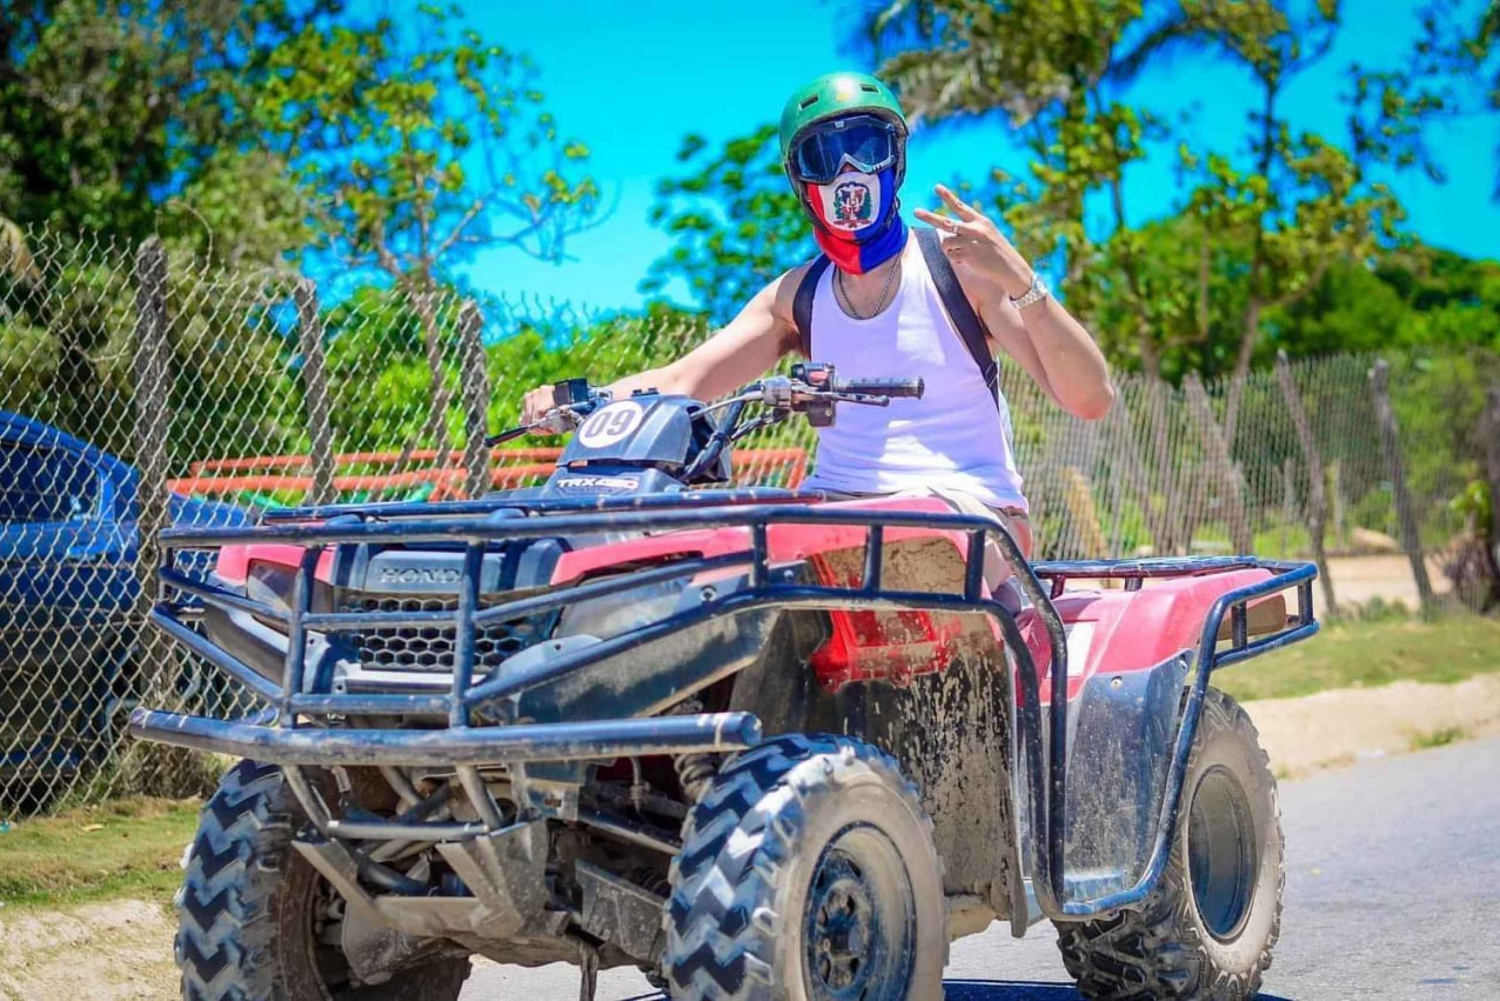 ATV 4x4 Tour in Punta Cana: The Ultimate Off-Road Experience